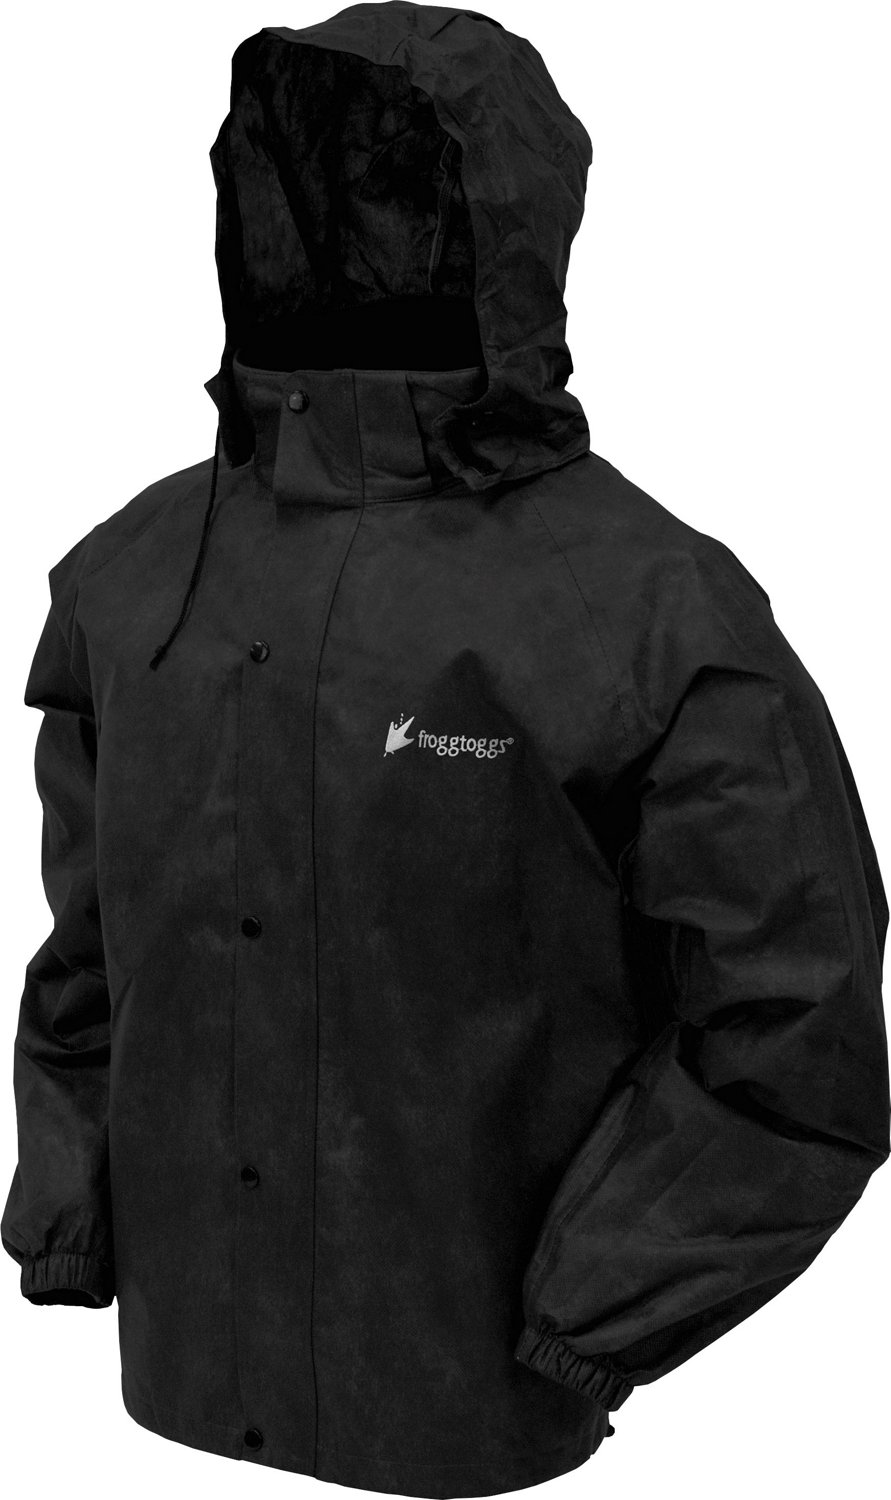 Frogg Toggs All-Sport Rain Suit for Men